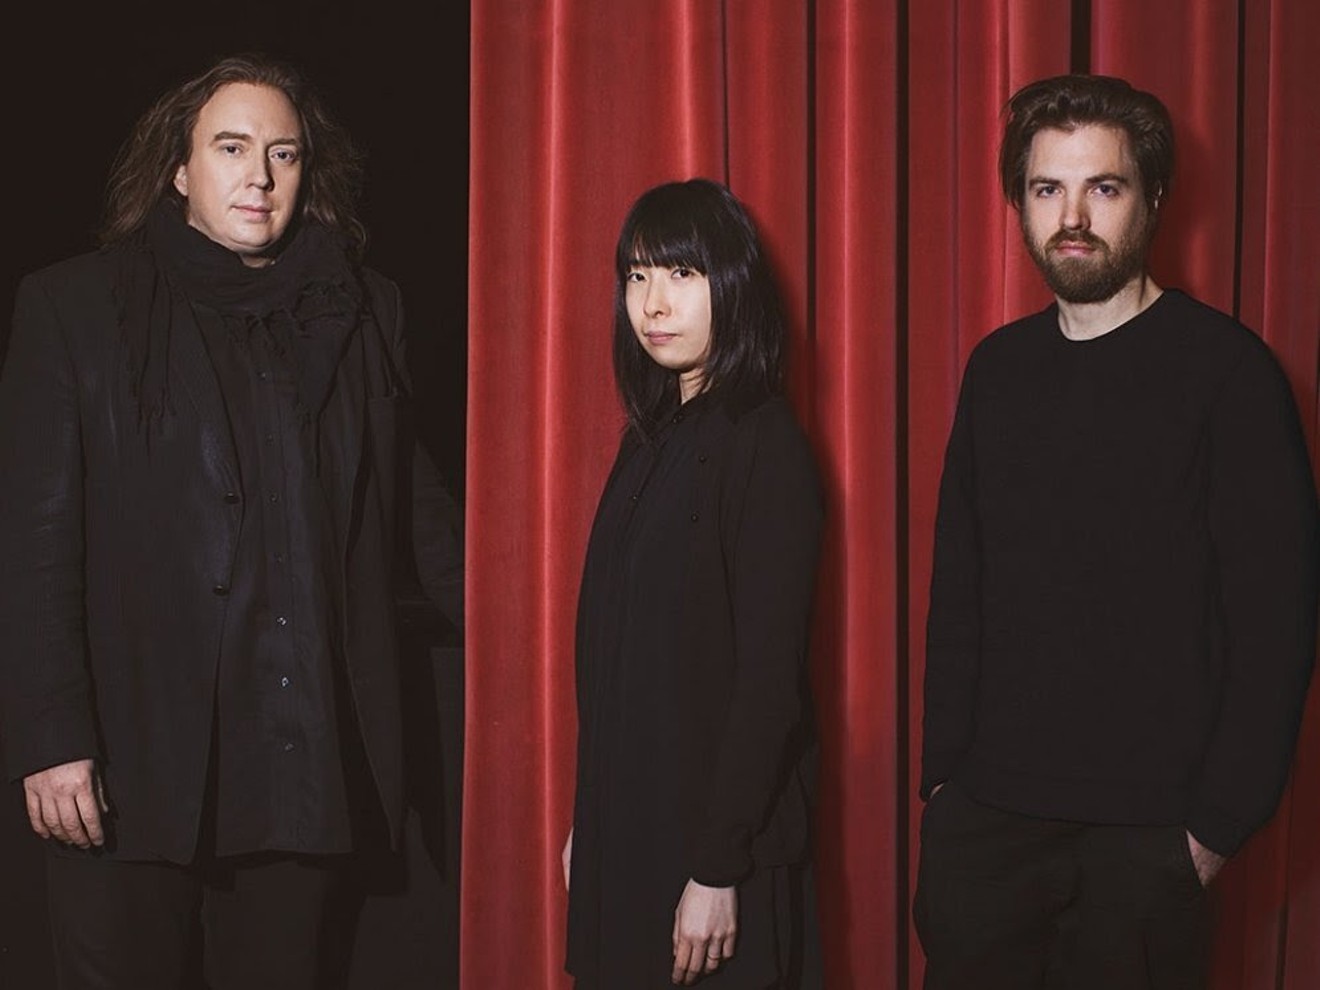 Tangerine Dream kicks off its first North American tour at the Miami Beach Bandshell on Friday, September 8.